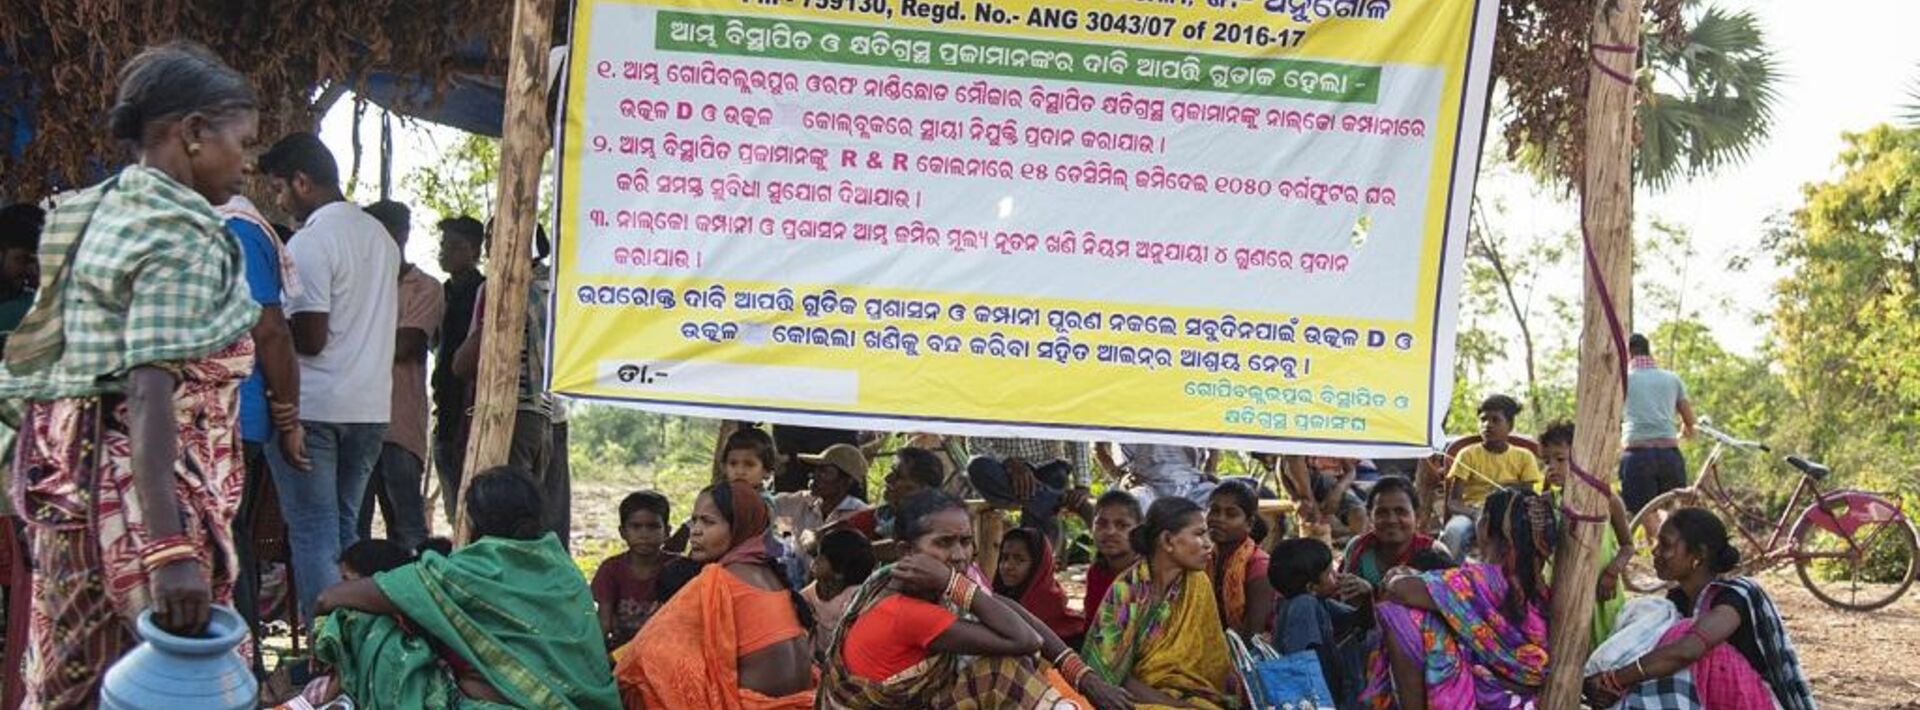 A group of women and children are seated in front of a poster on which a list is presented in Odiya language, while men stand at the back.